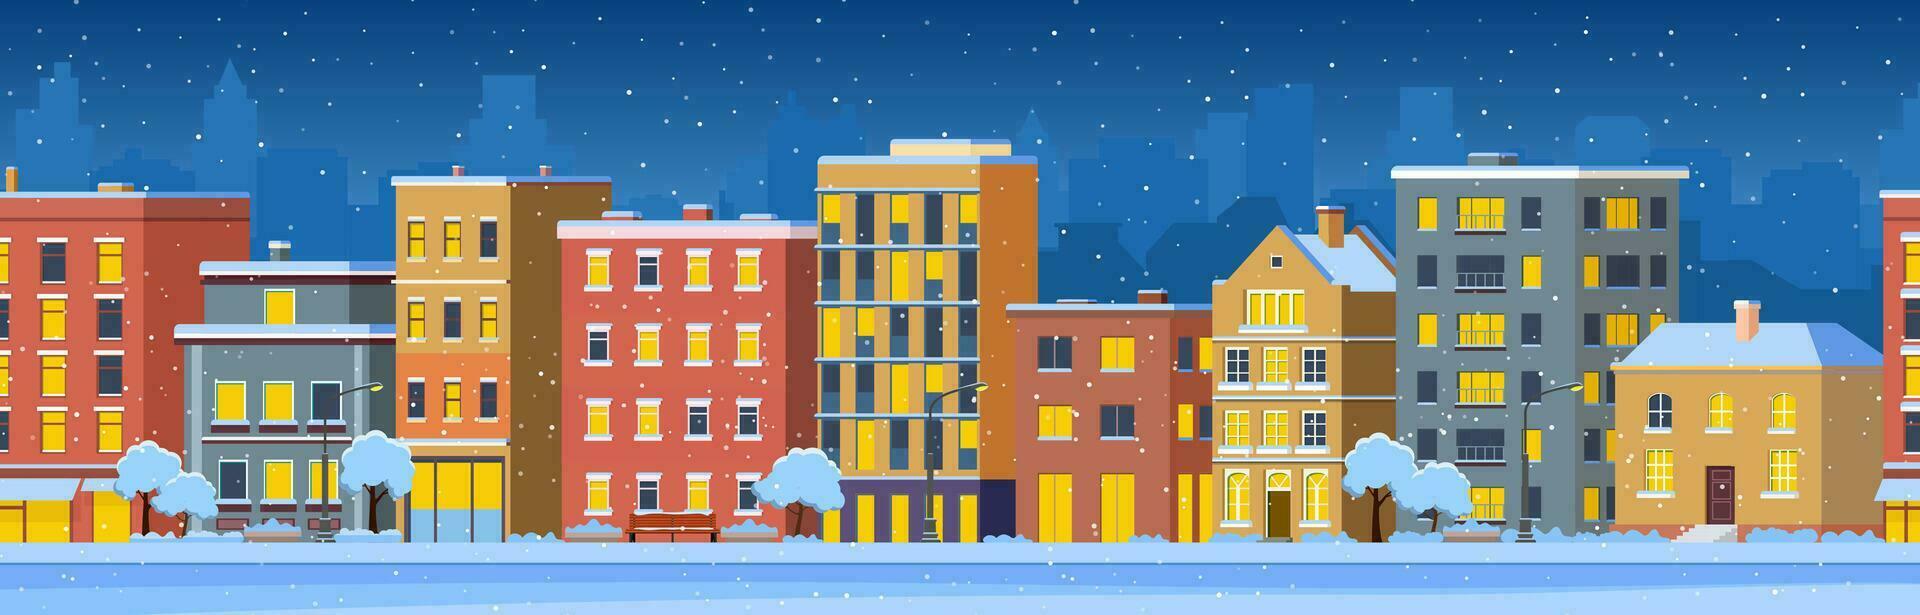 city building houses winter street cityscape in the night background. merry christmas happy new year concept horizontal banner. Vector illustration in flat style